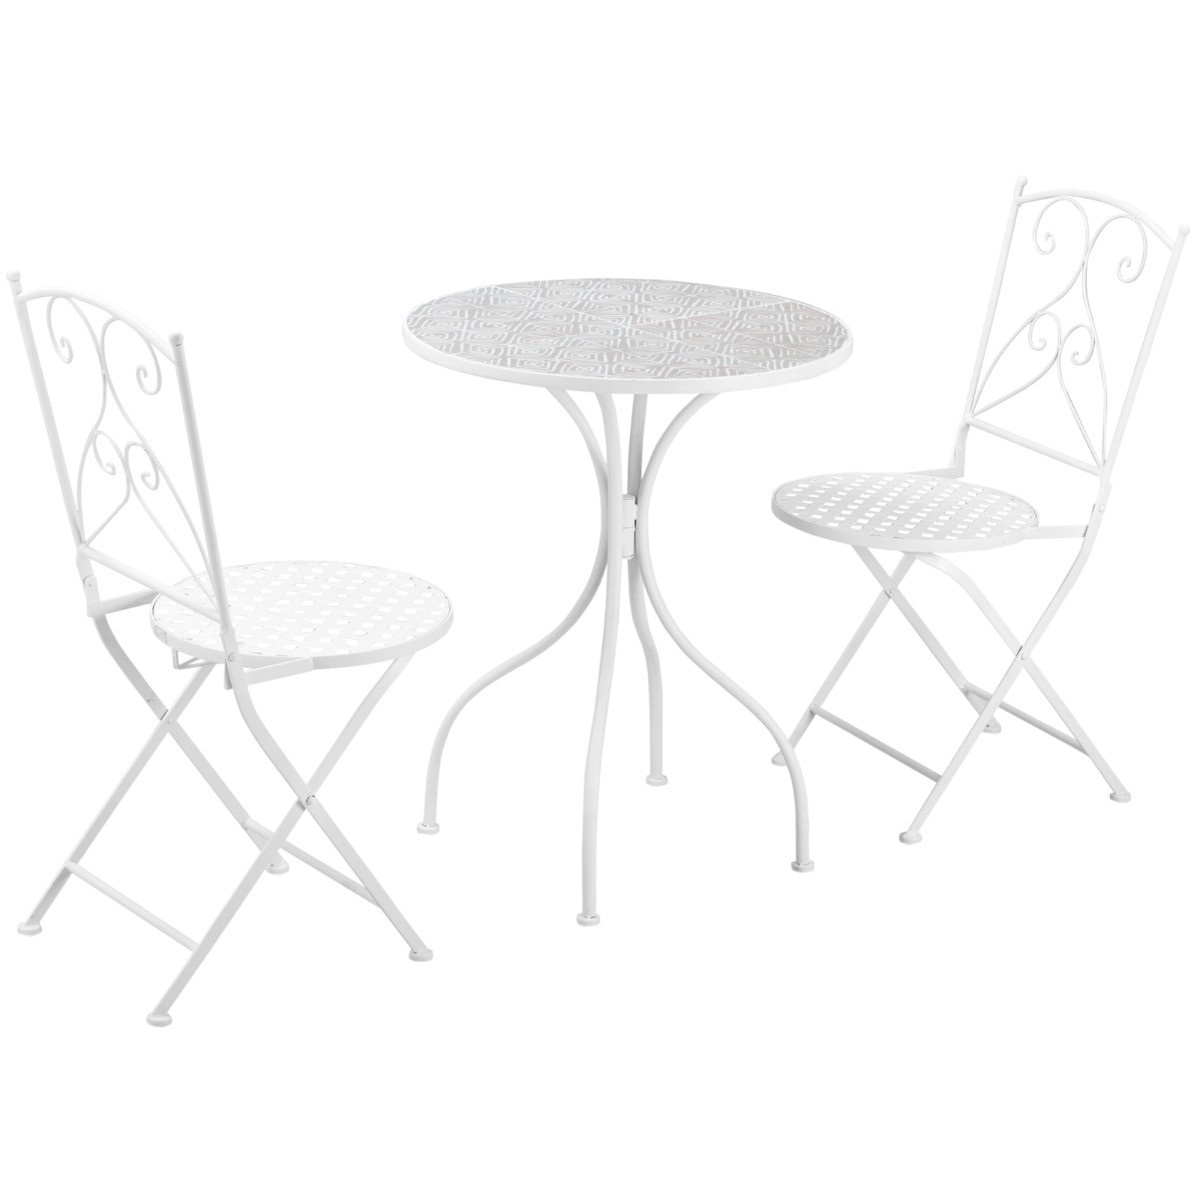 Outsunny Garden Bistro Set With Mosaic Tabletop, 3 Piece - White>